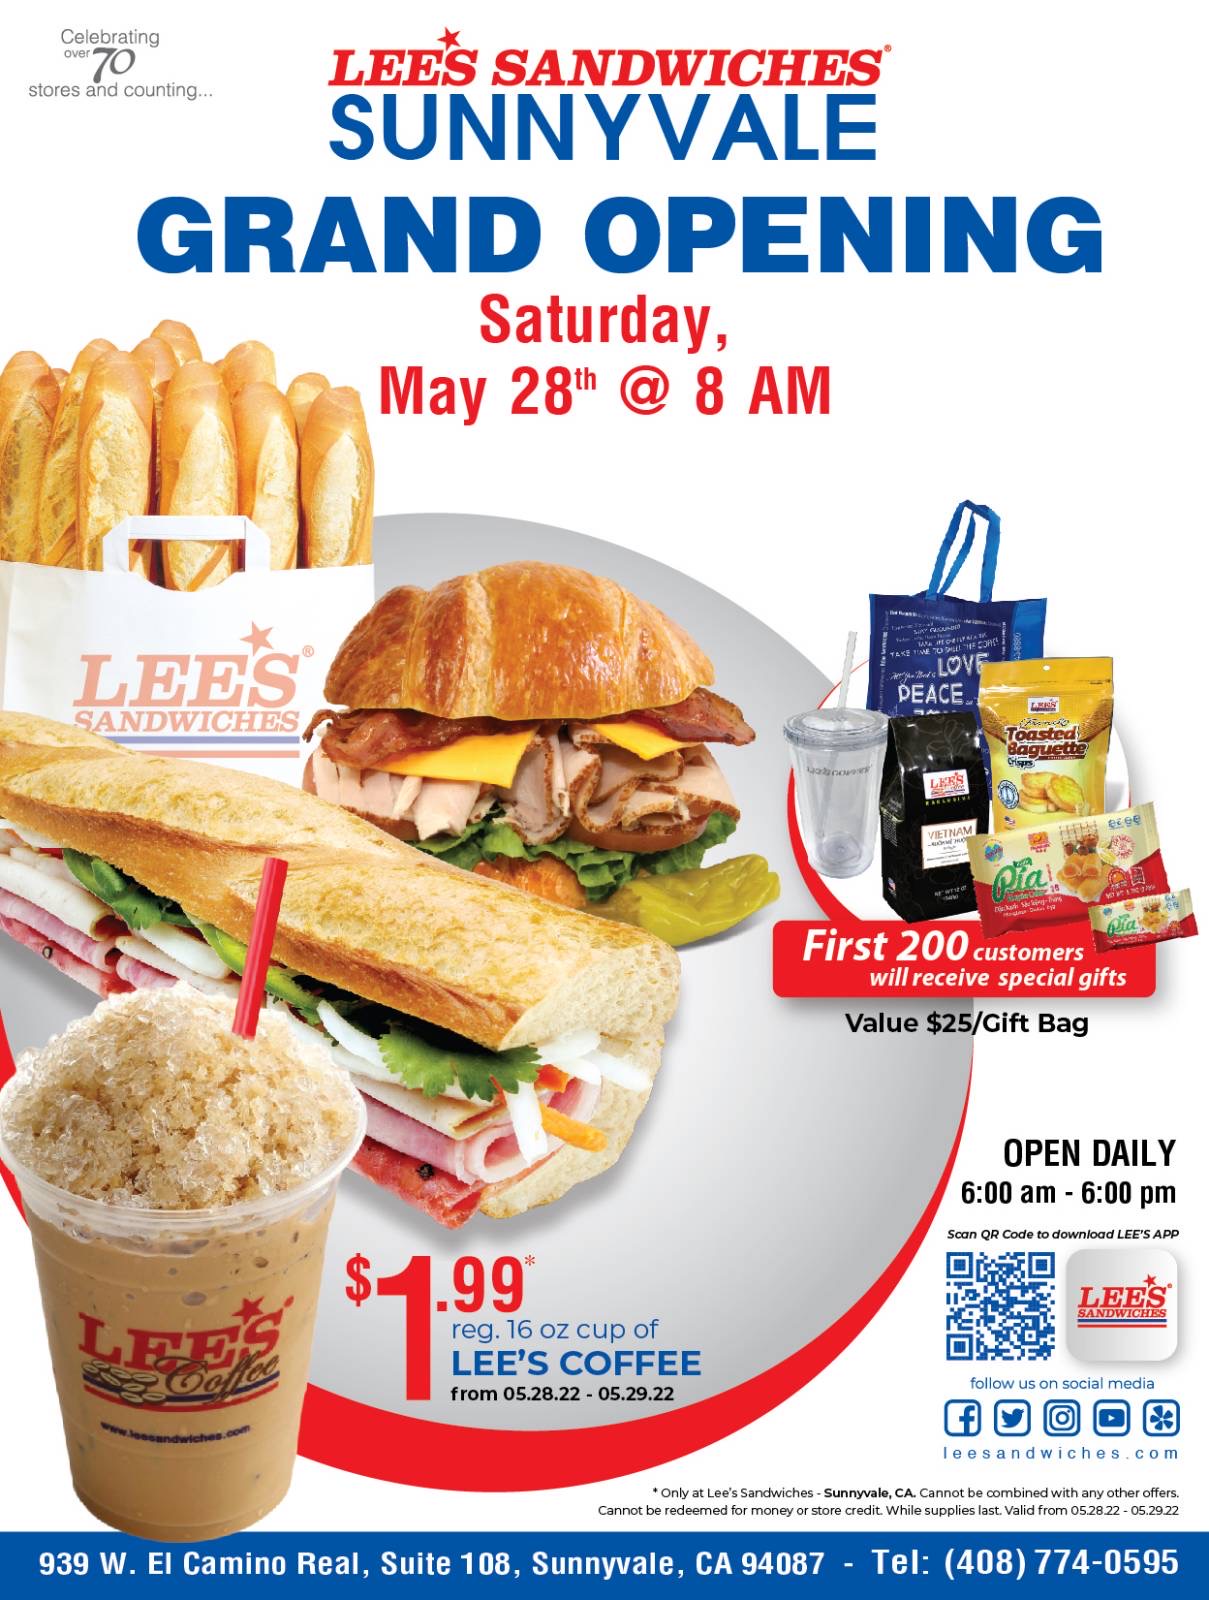 Sunnyvale Grand ReOpening on 05.28.2022 – 200 special gifts & promotion!